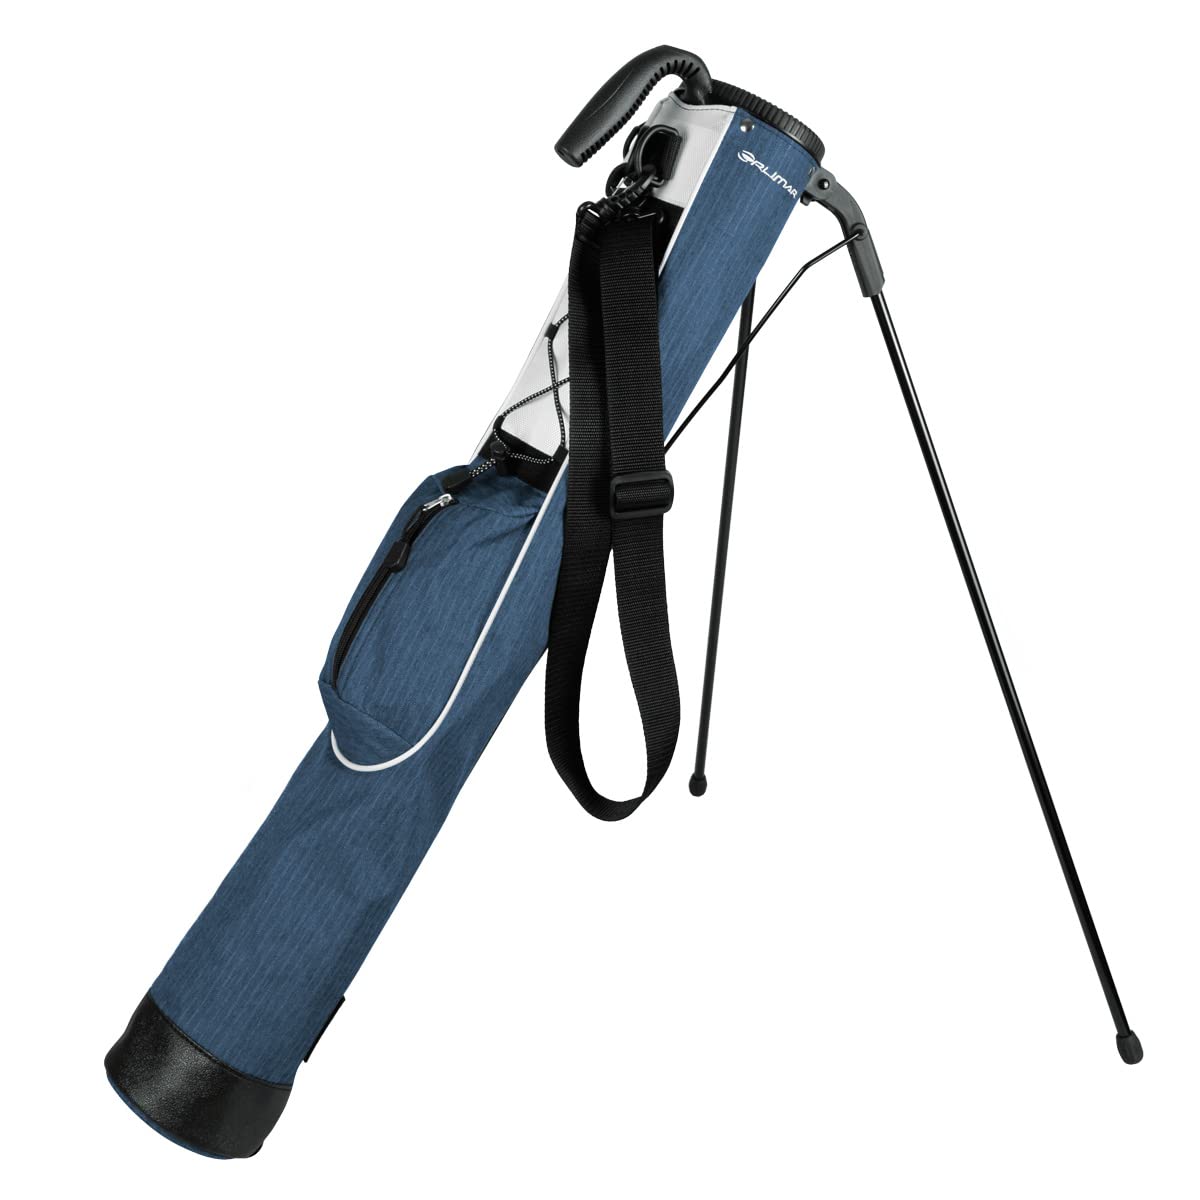 Orlimar Pitch 'n Putt Golf Lightweight Stand Carry Golf Club Bag for Men and Women, Plaid Poly Azure Blue